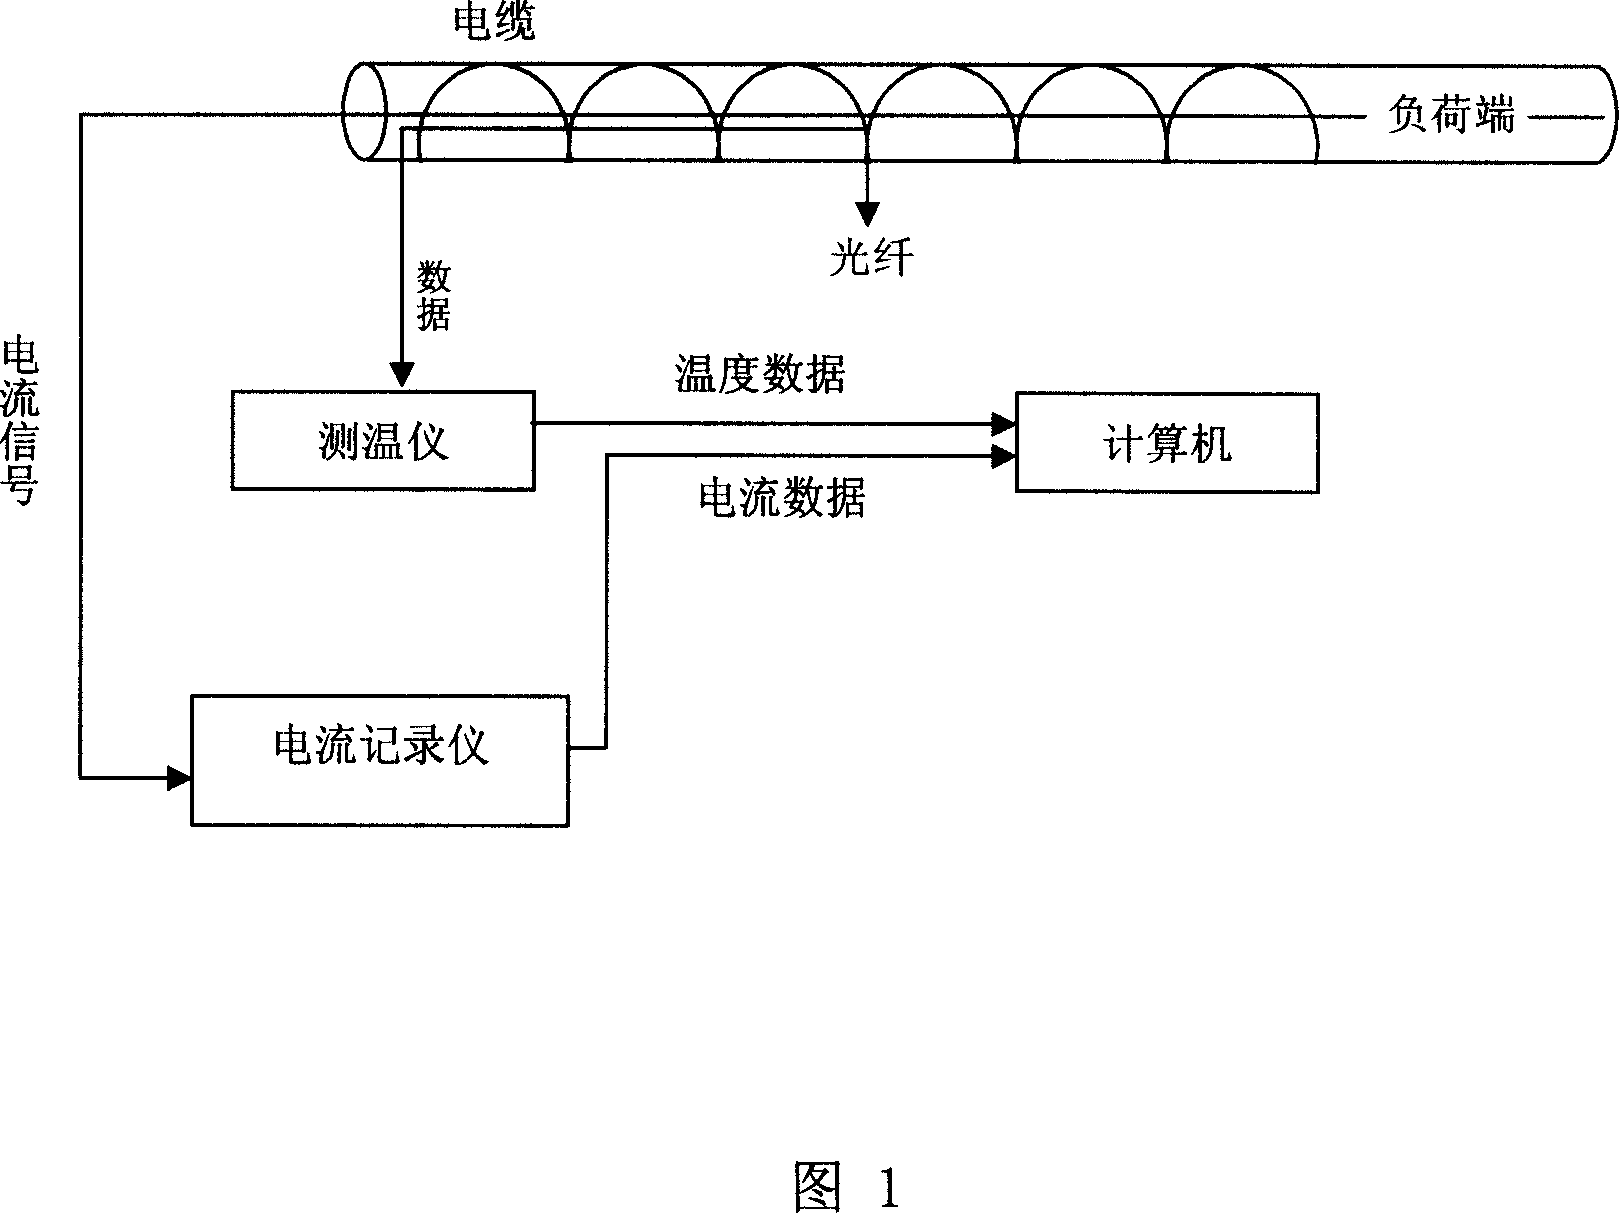 Electric-cable core temperature on-line monitoring system